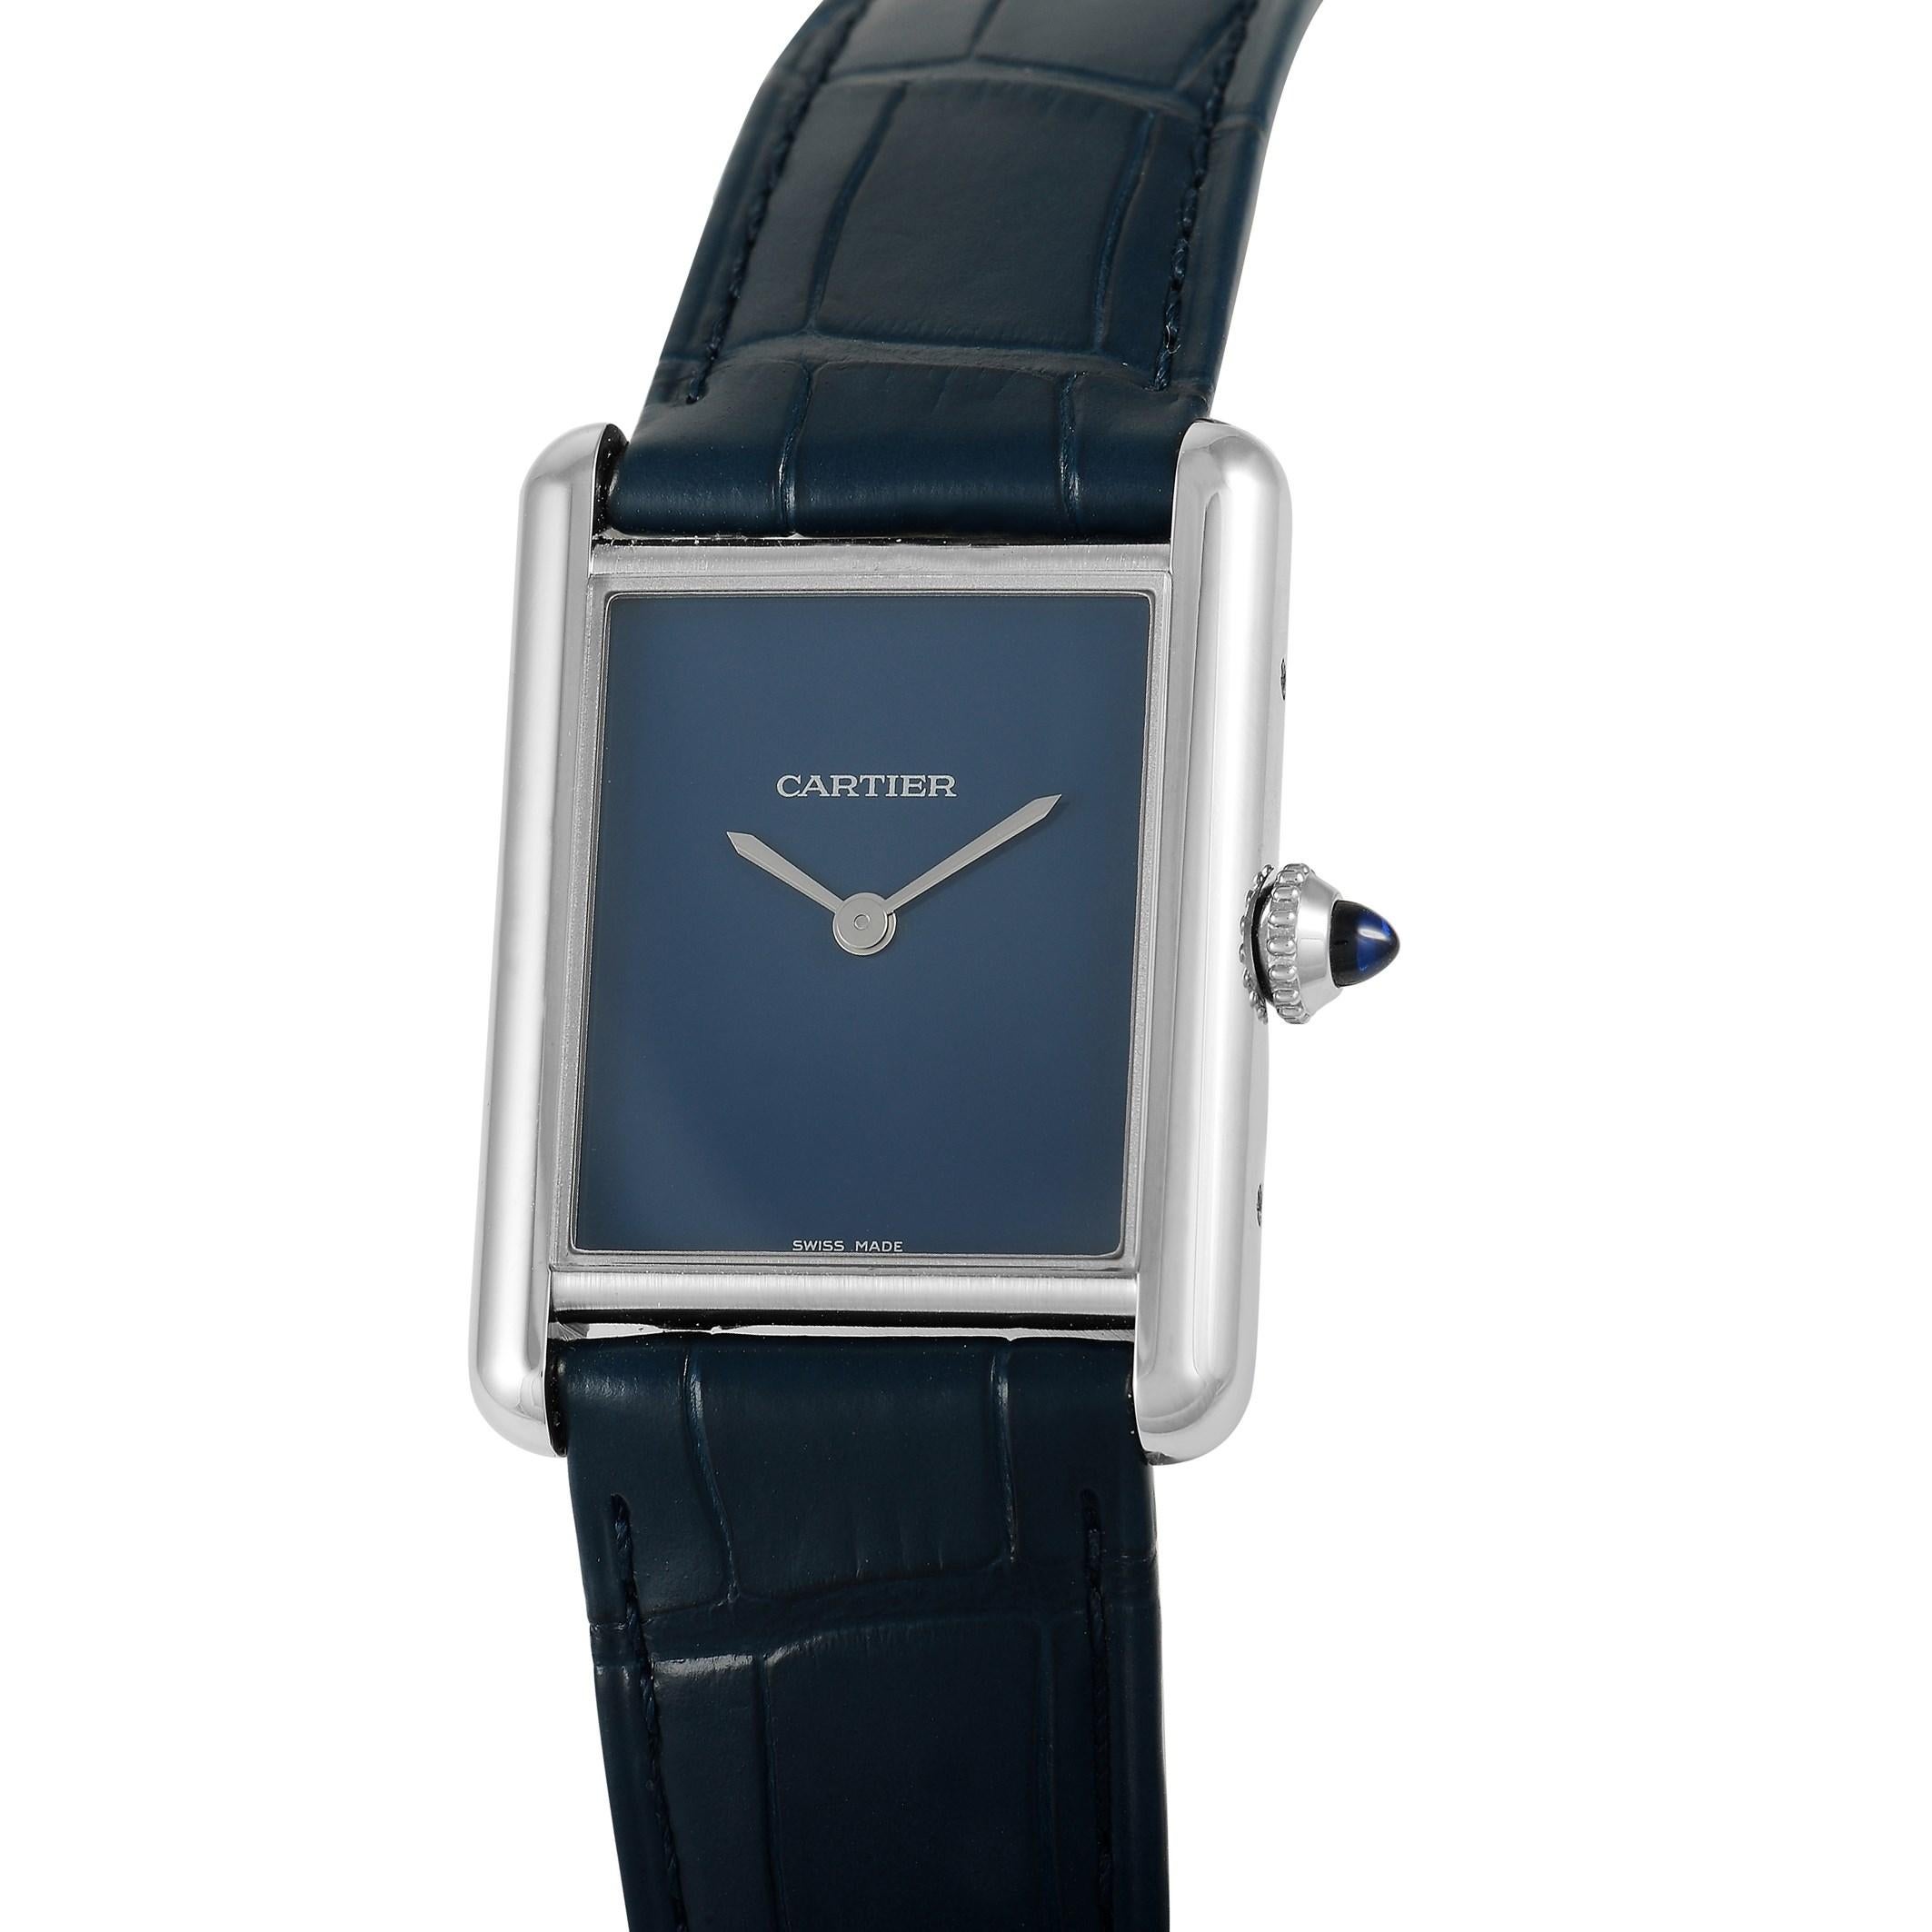 This Cartier watch, reference number WSTA0055, features a stainless steel case that measures 33.7 mm x 25.5 mm. It is presented on a sleek navy alligator leather bracelet with a tang clasp. The deep blue dial displays hours and minutes. This model